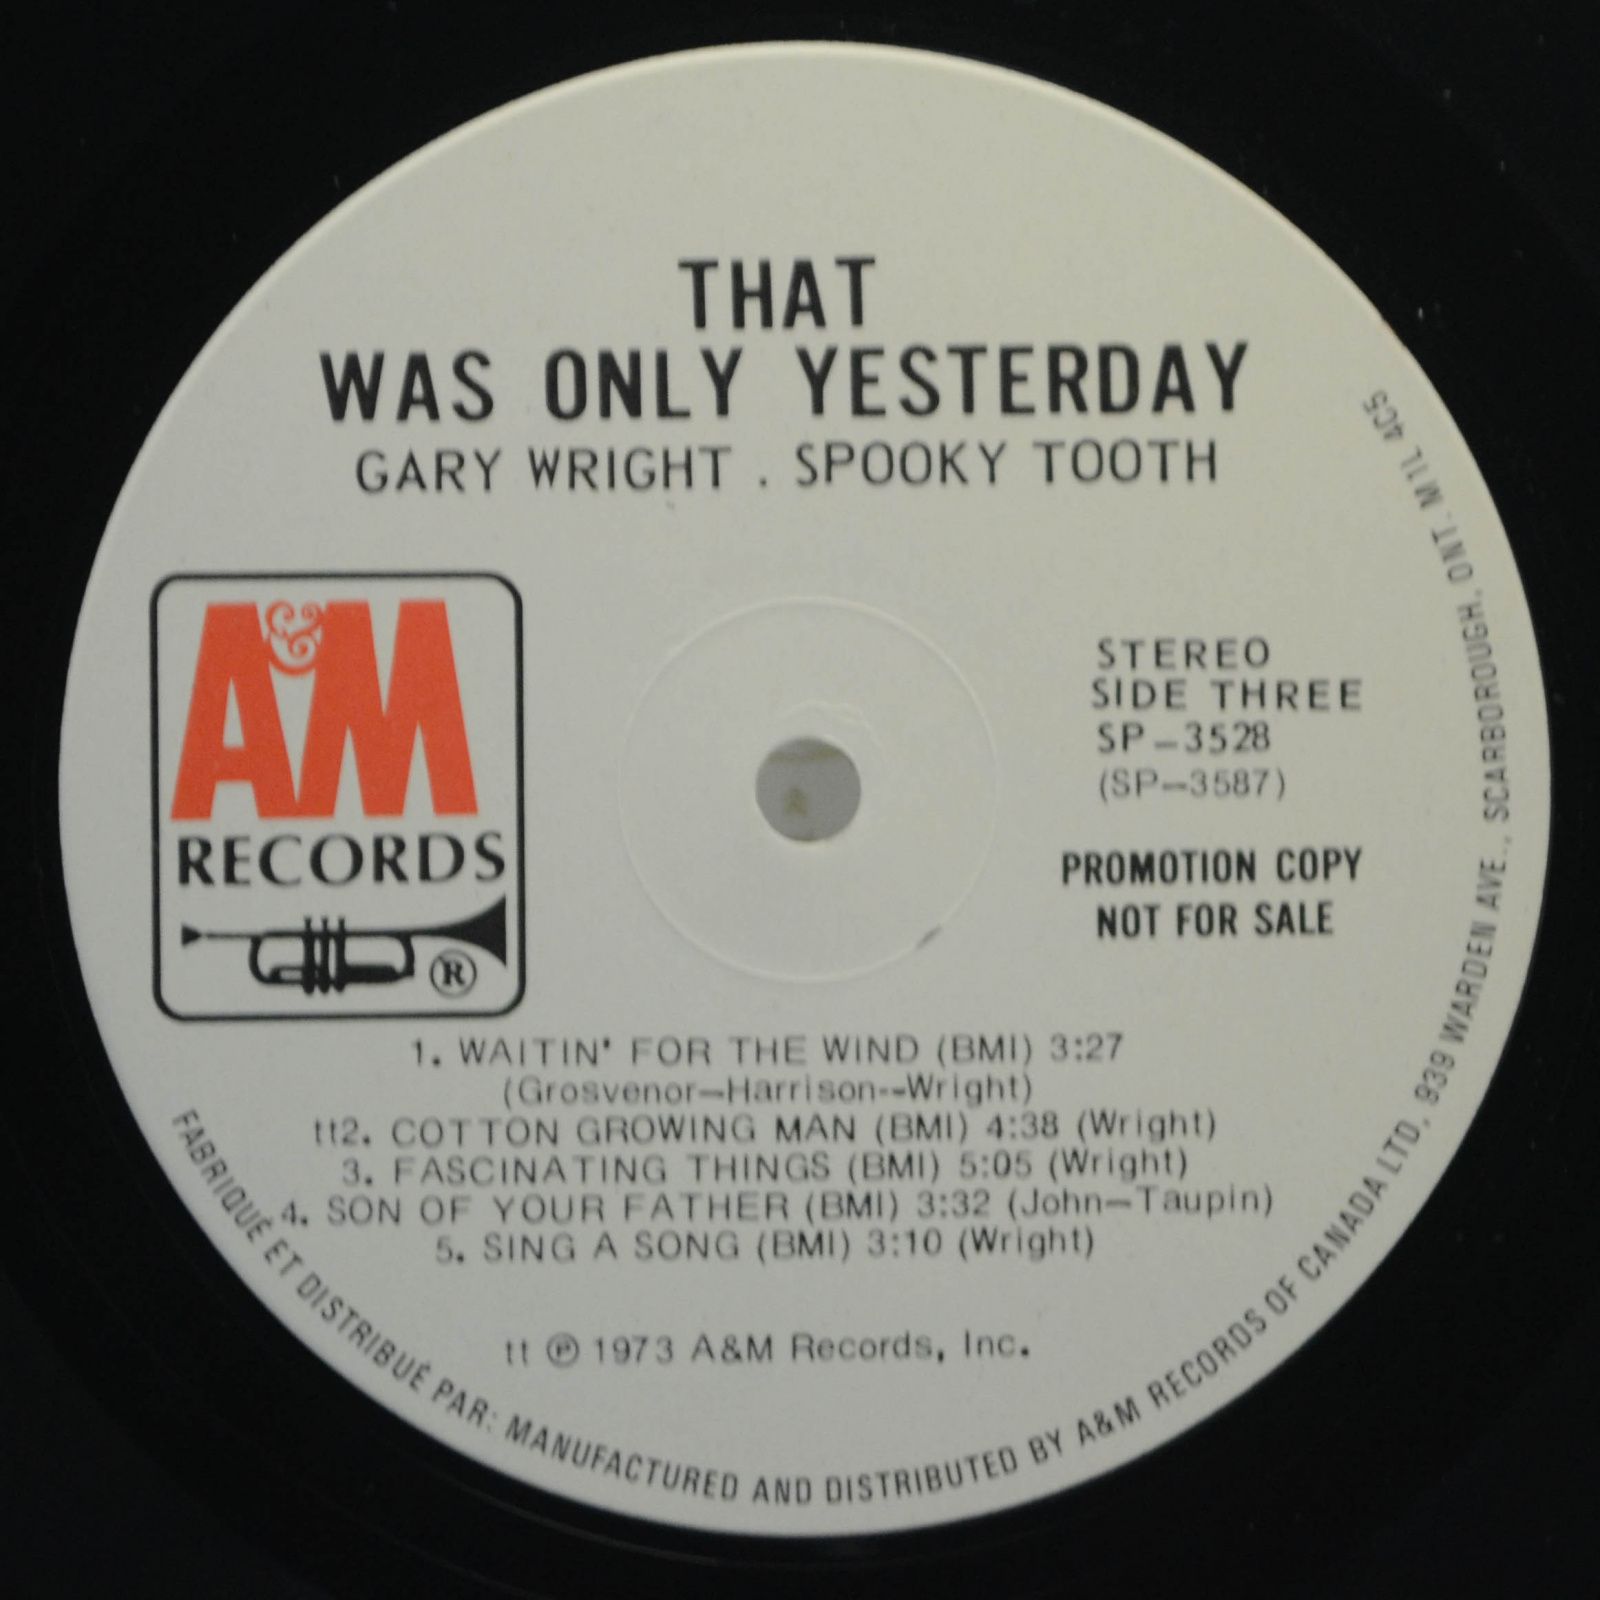 Gary Wright - Spooky Tooth — That Was Only Yesterday (2LP), 1973